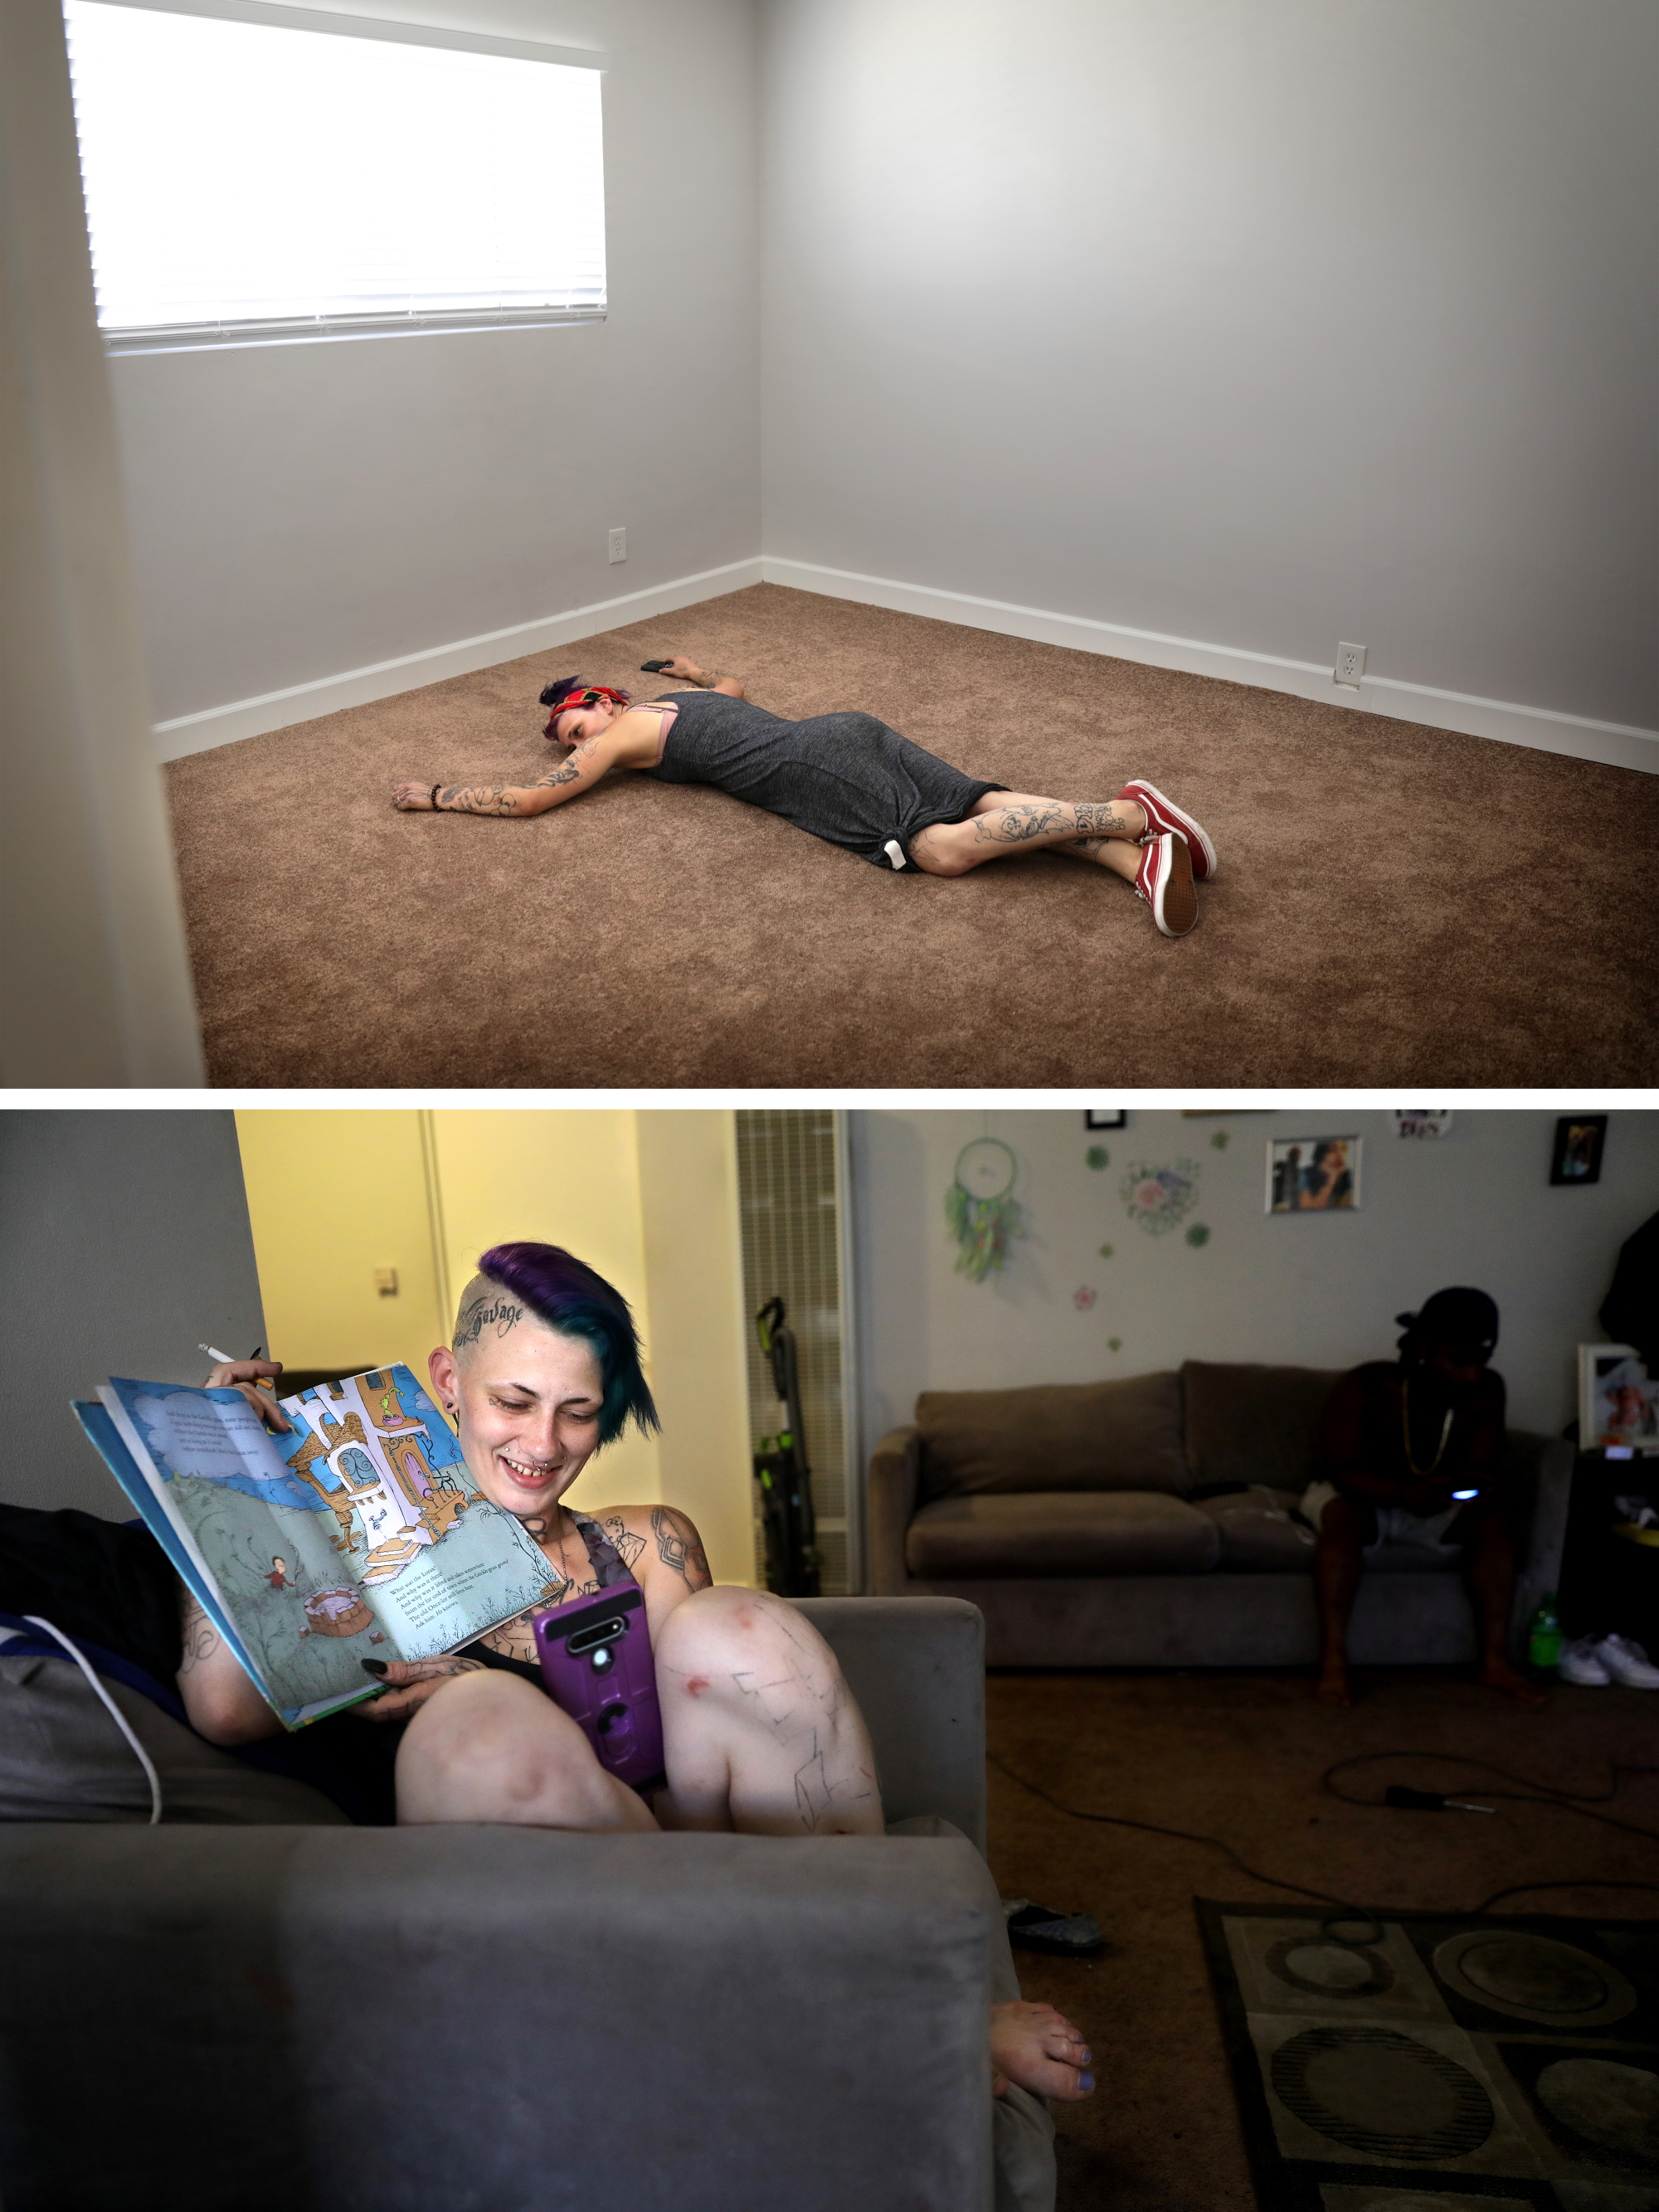 Two photos: A woman sprawled a carpeted room. A woman holding up a children's book to a phone